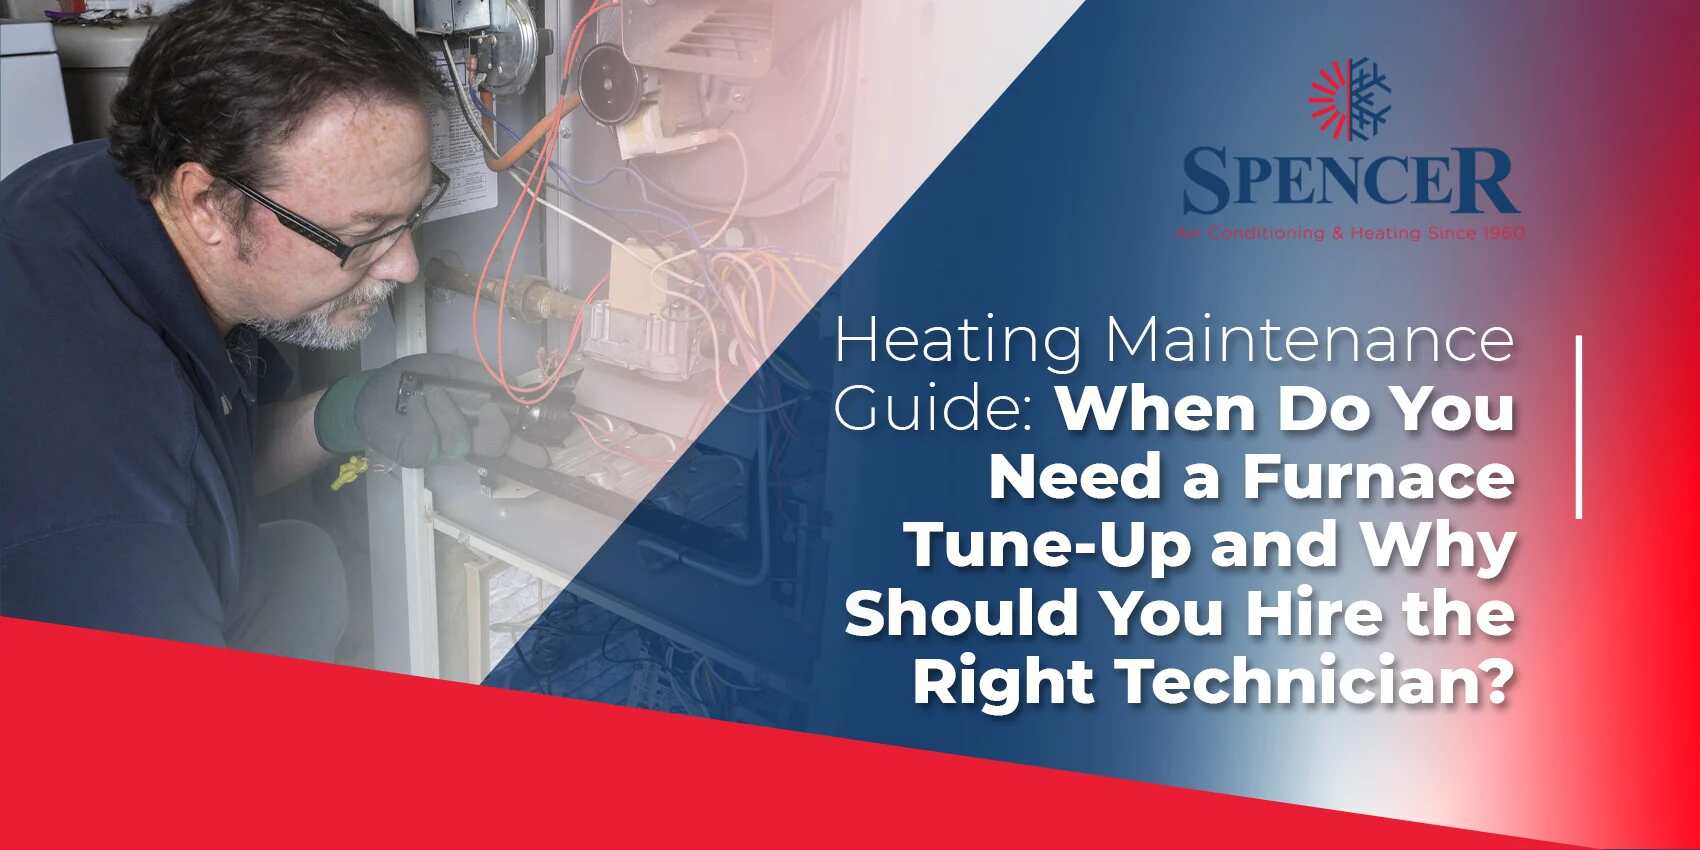 spencer heating maintenance guide: when do you need a furnace tune up and why should you haire the right technician?